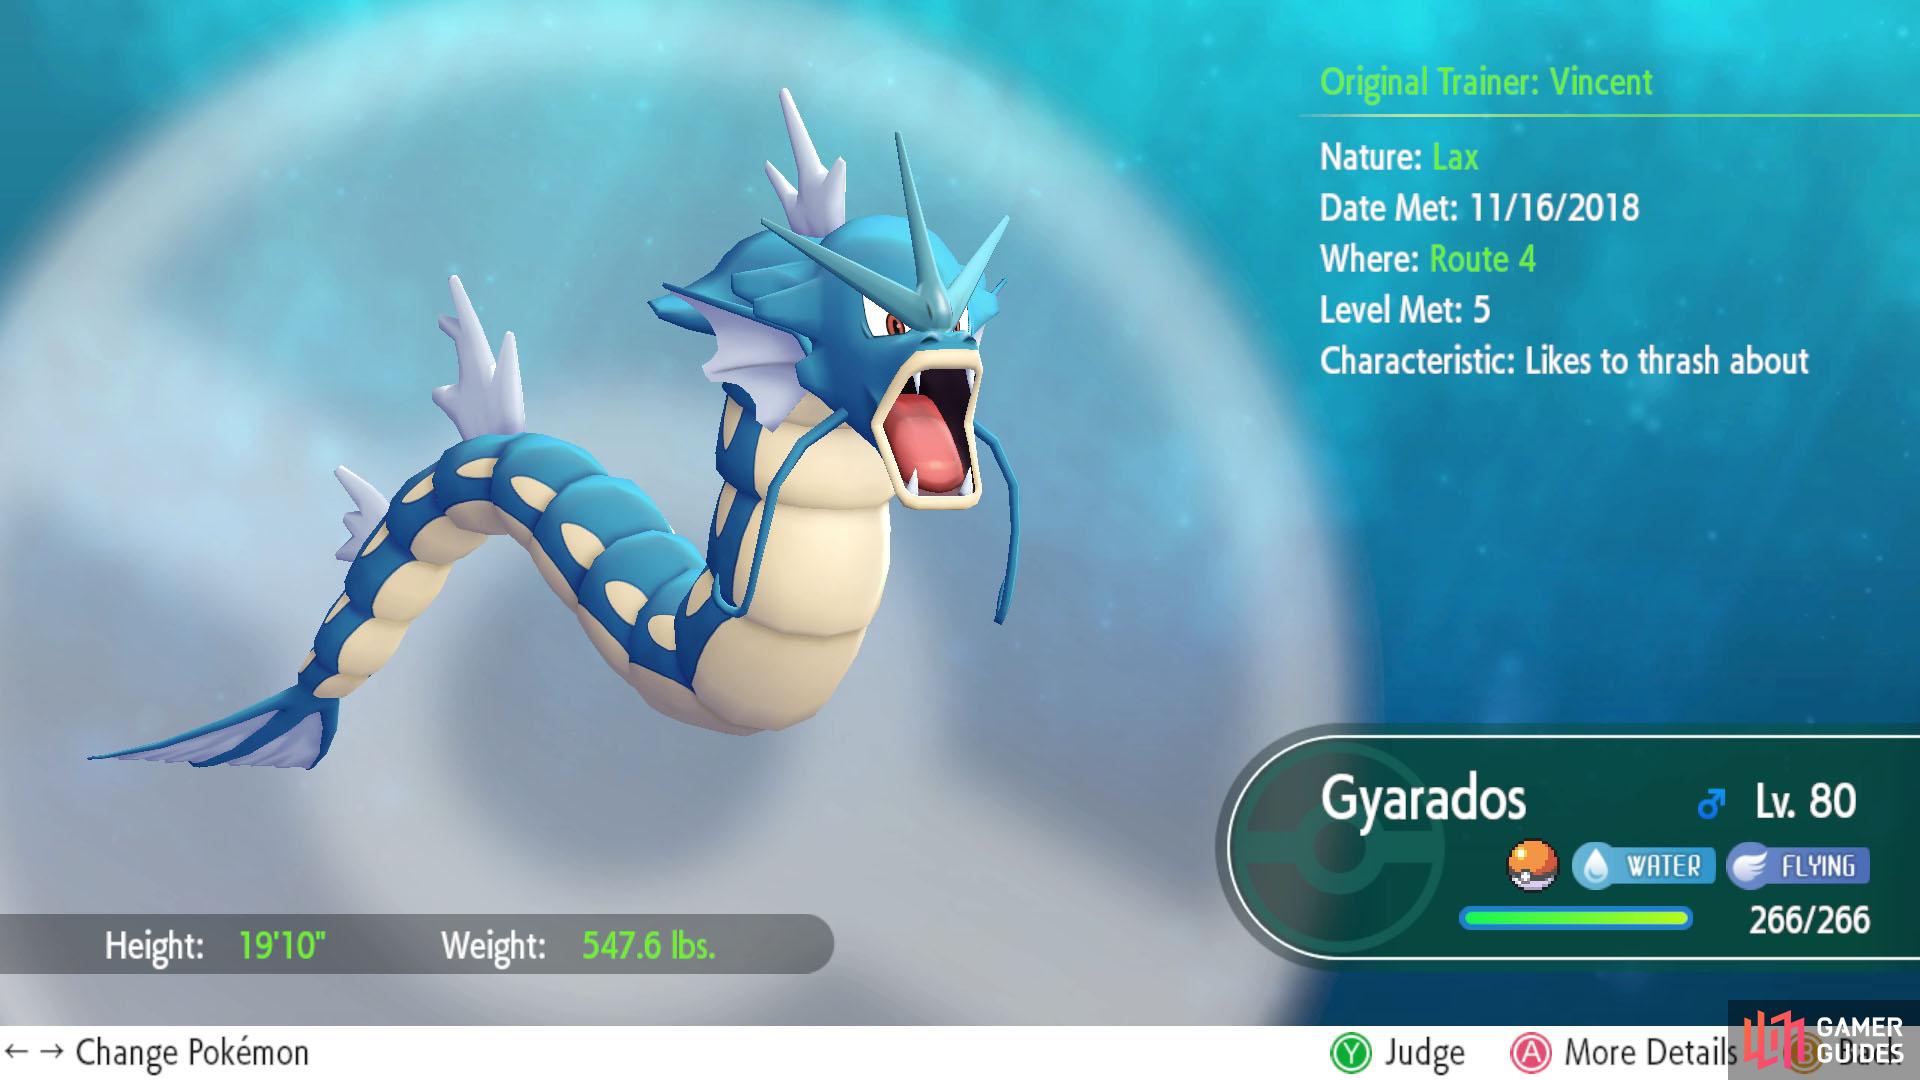 Our Gyarados is Lax. Although you wouldn’t know from all the destruction it’s caused.